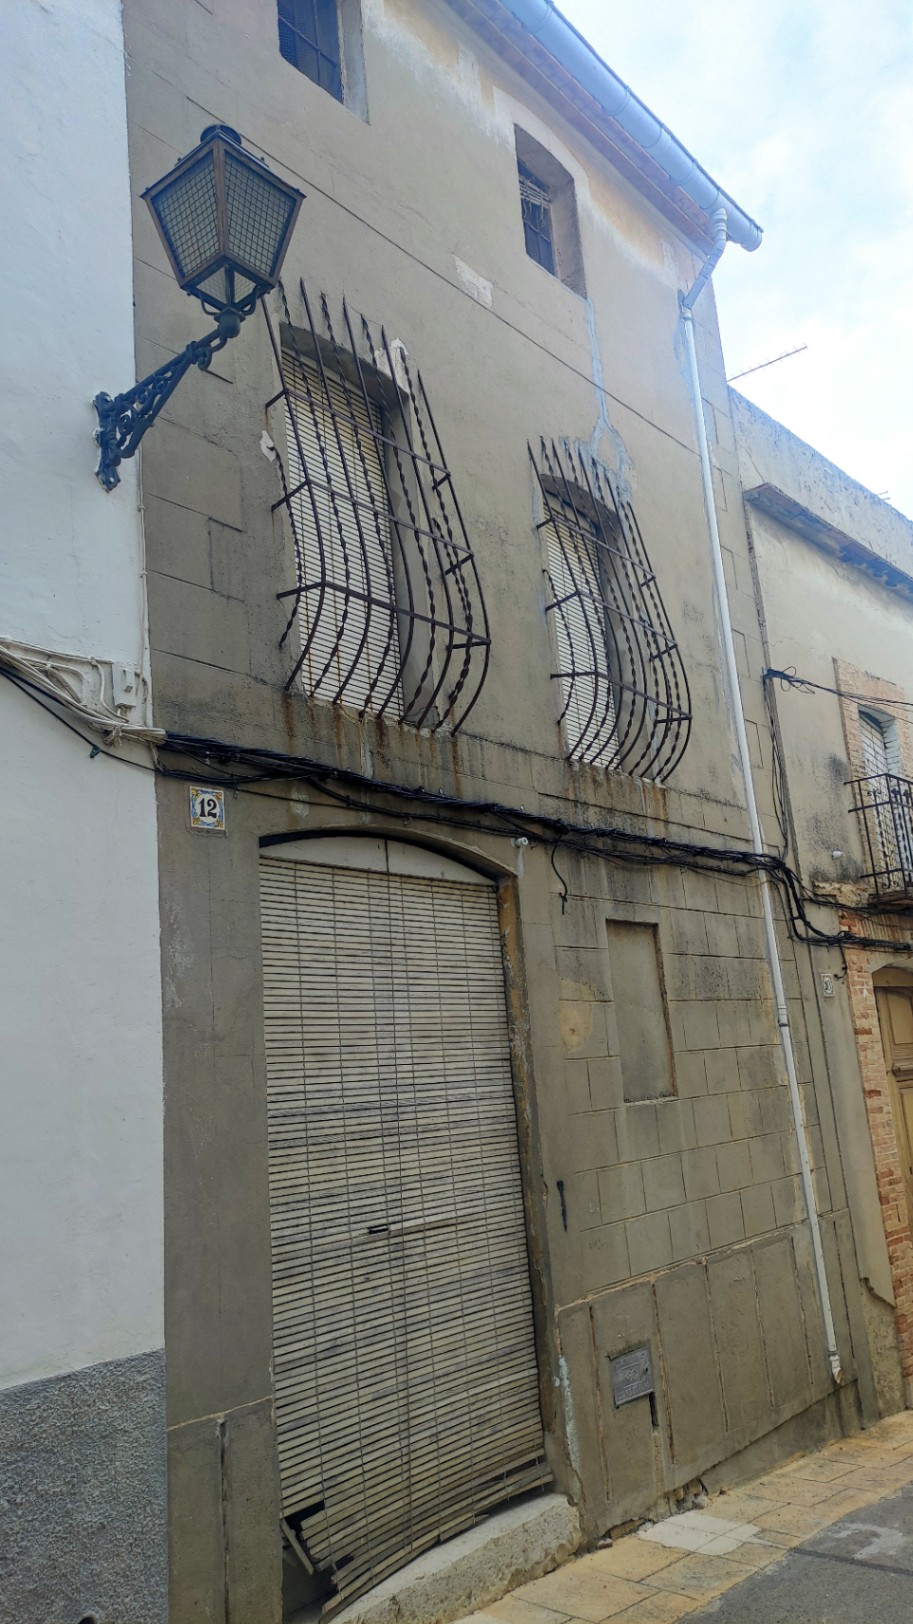 Townhouse for sale in Benimaurell